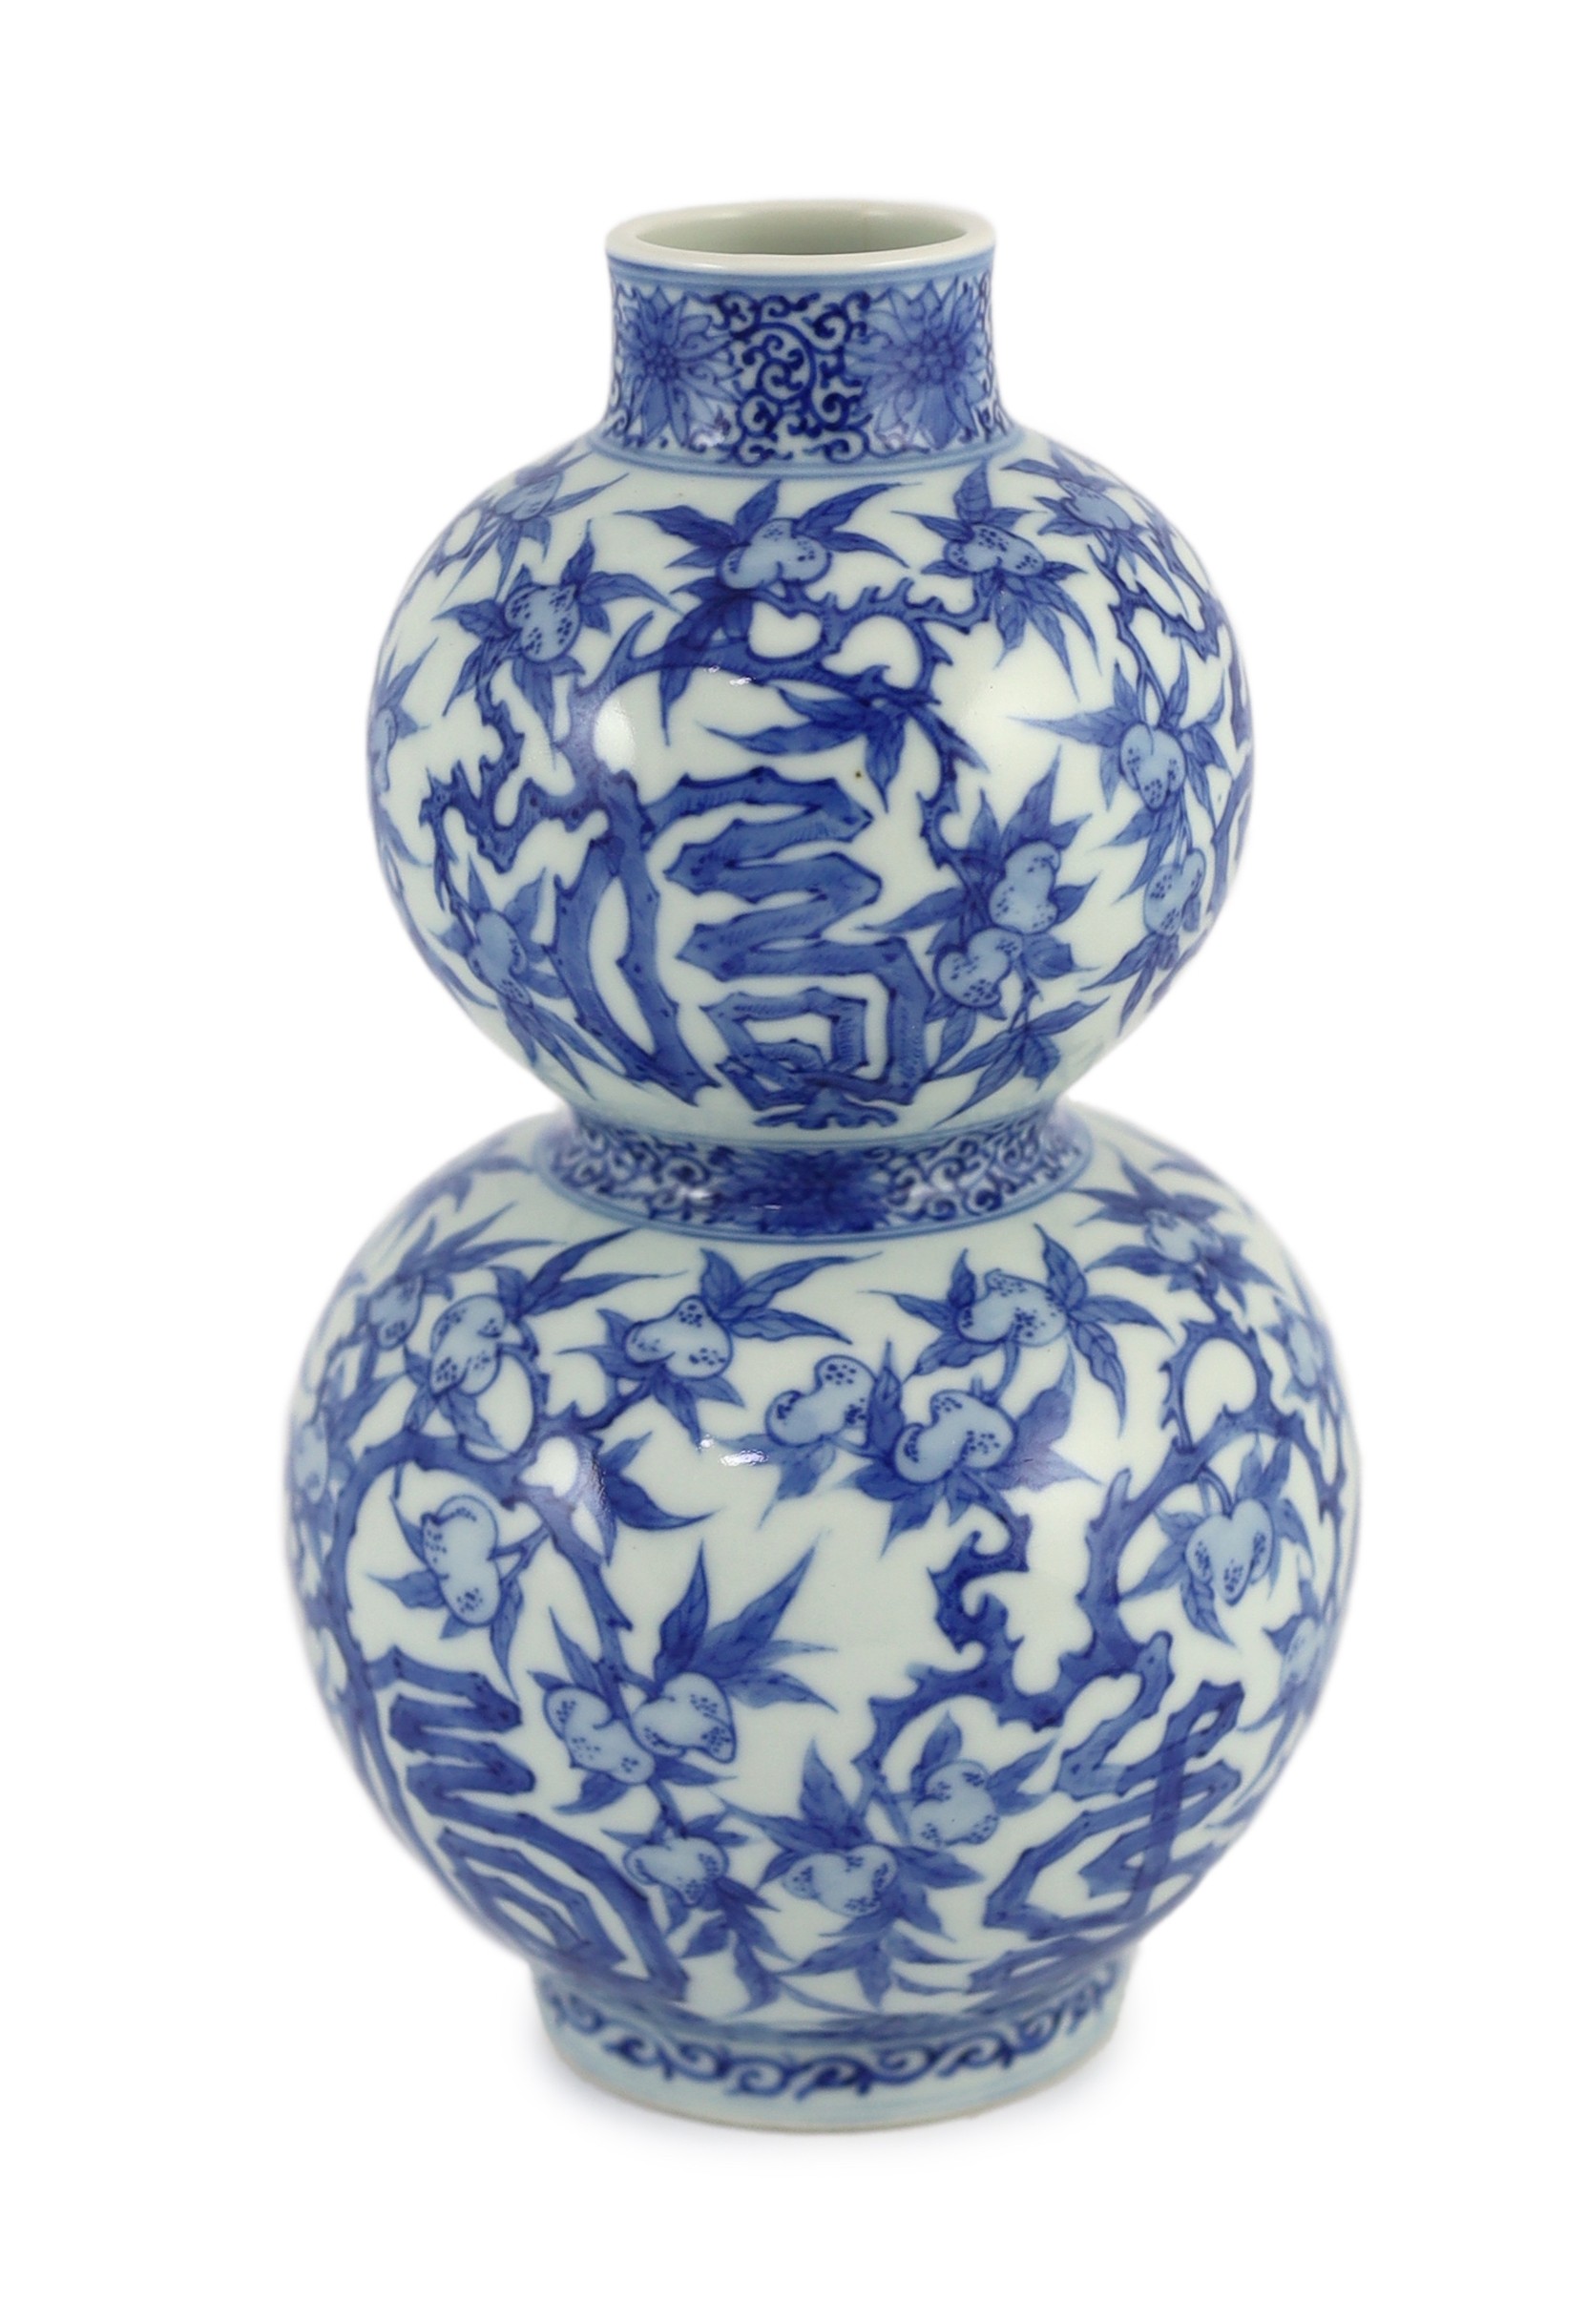 A Chinese blue and white 'fu lu shou' double gourd vase, Wanli mark probably late 19th century, 22cm high, splinter chip to rim and hairline crack to neck